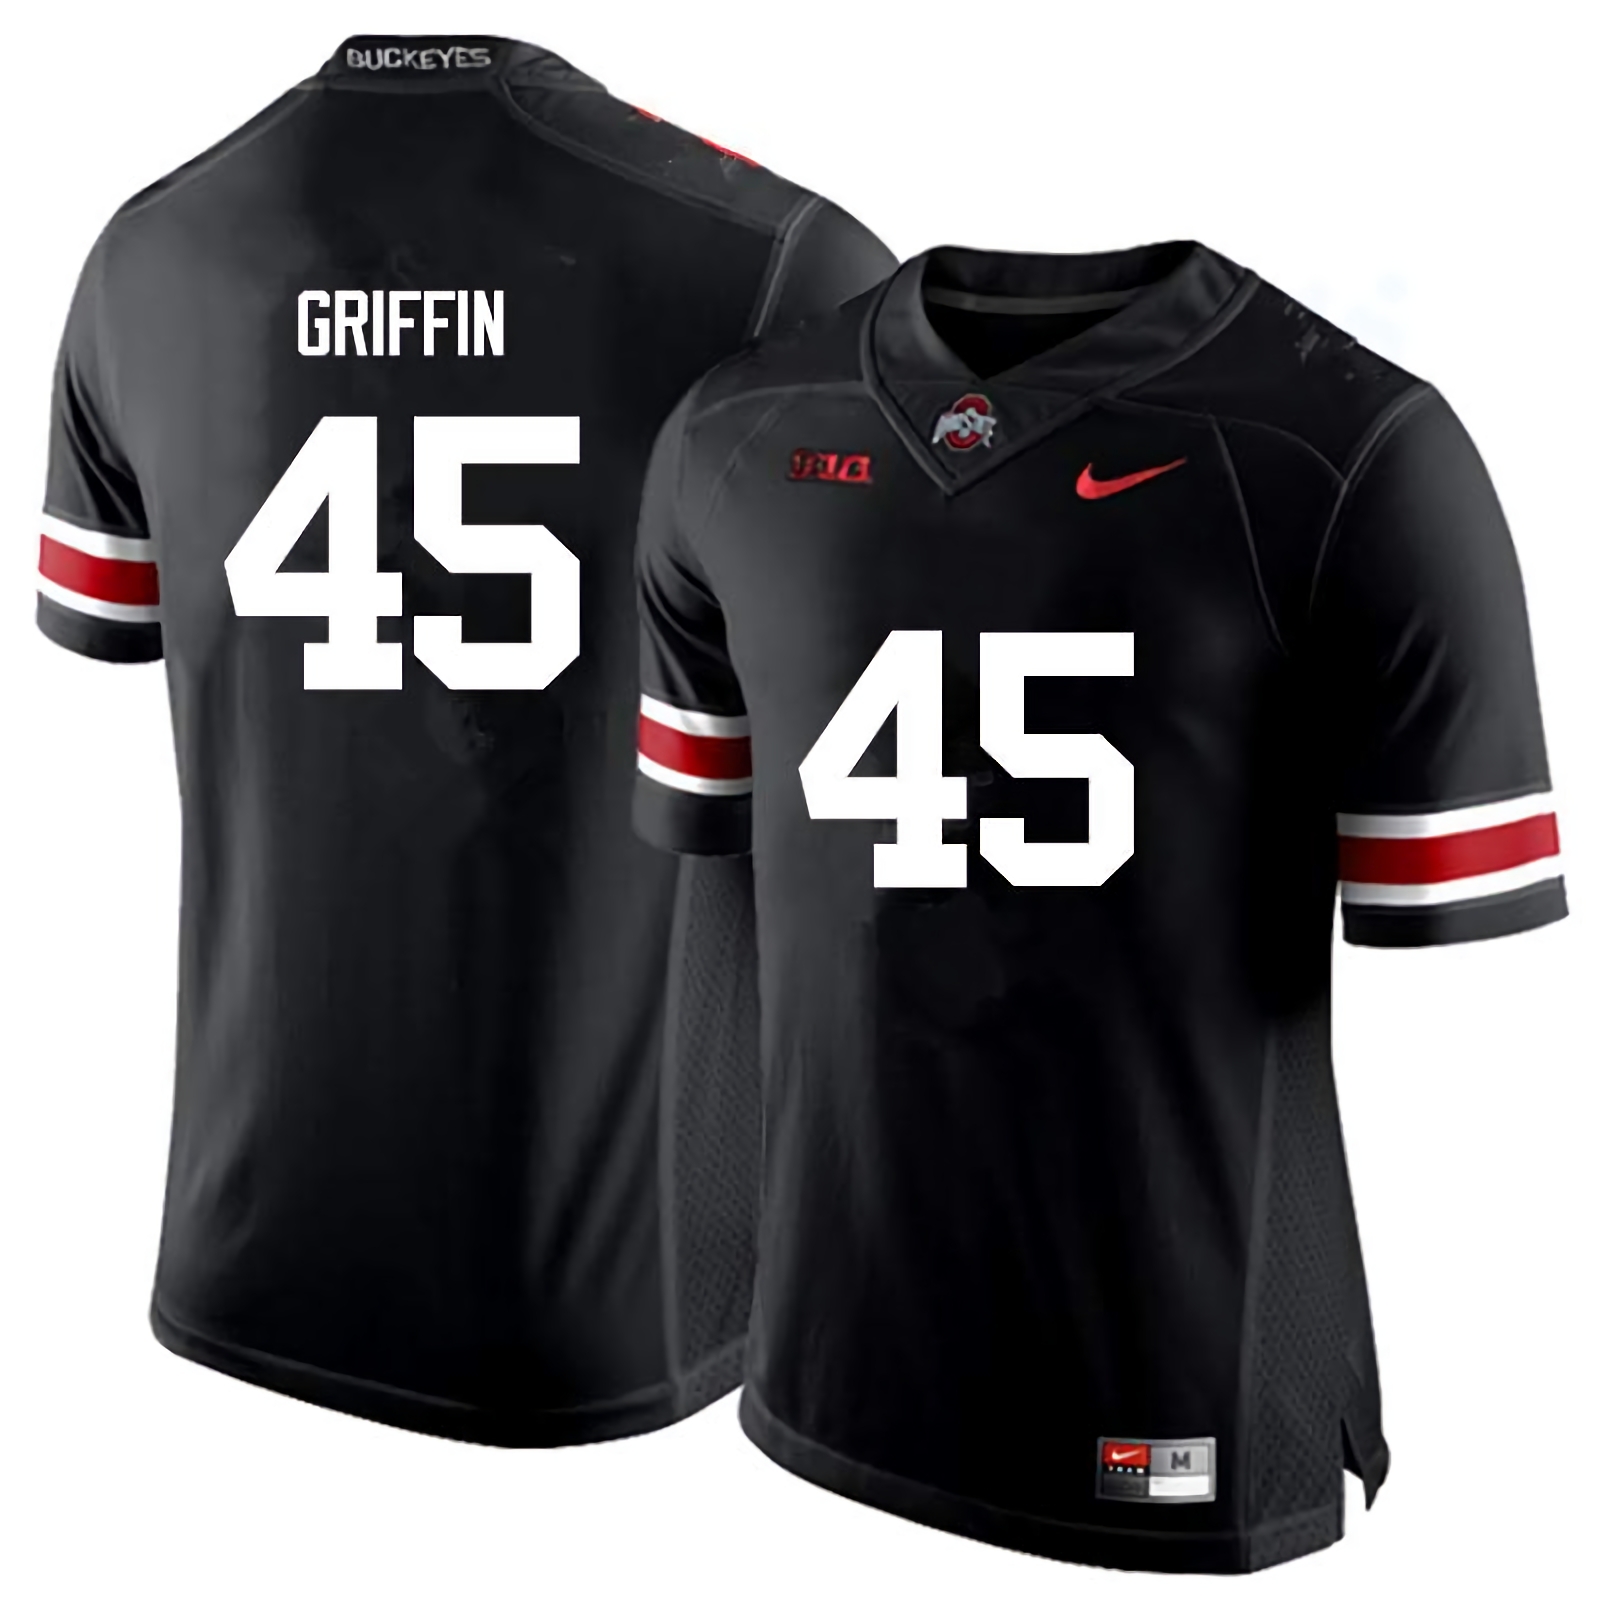 Archie Griffin Ohio State Buckeyes Men's NCAA #45 Nike Black College Stitched Football Jersey FUZ6156NG